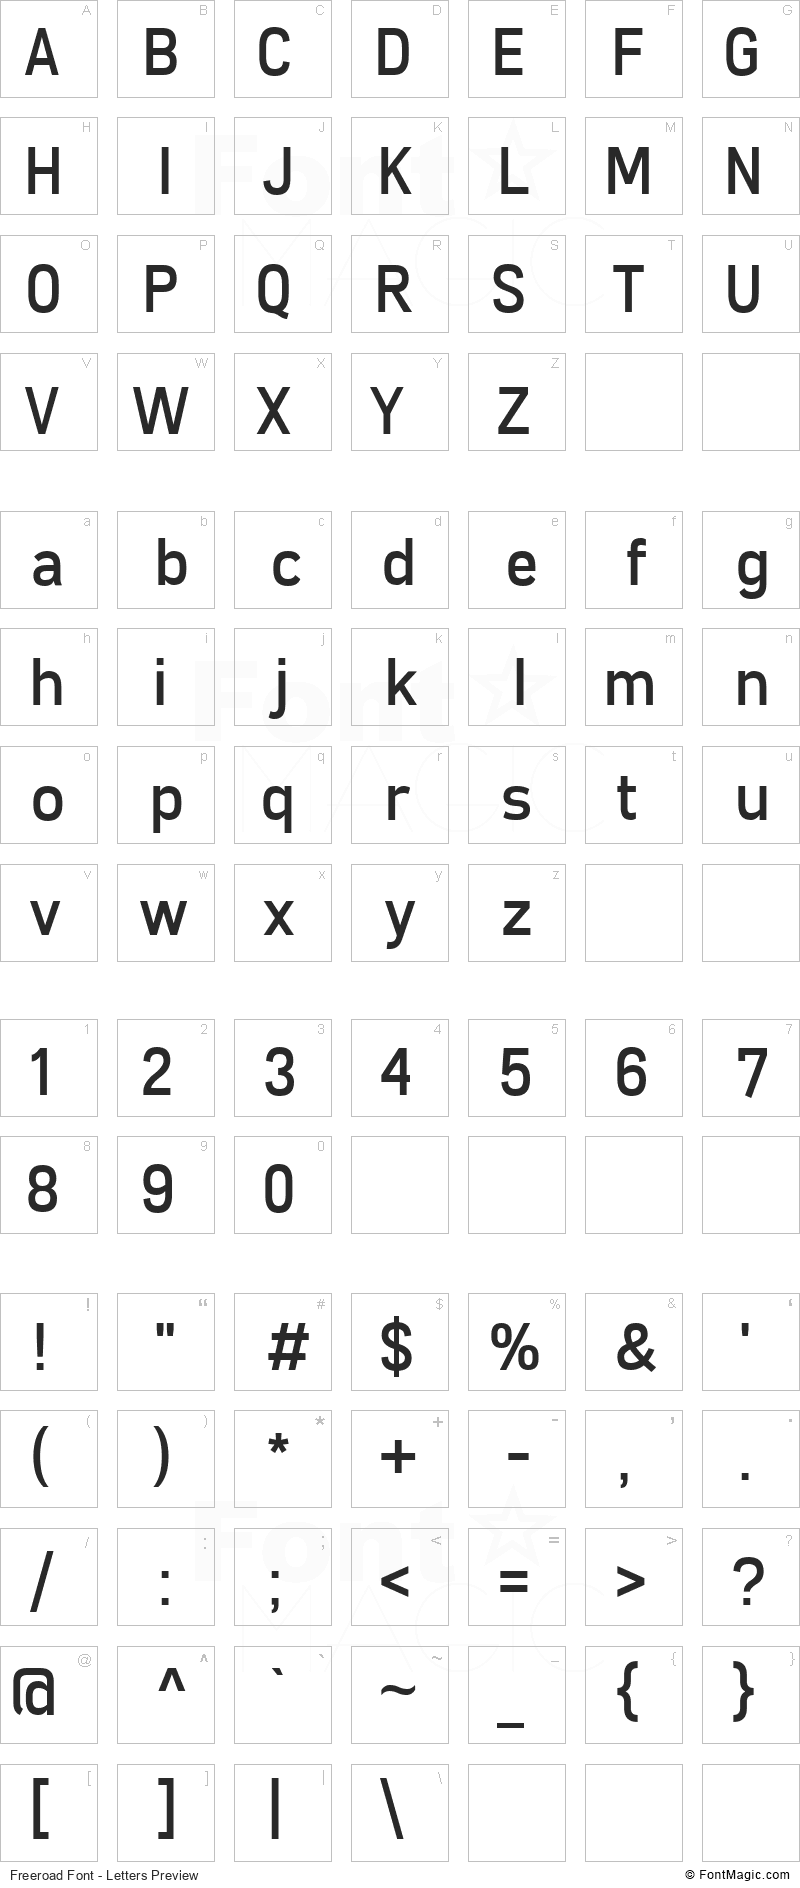 Freeroad Font - All Latters Preview Chart